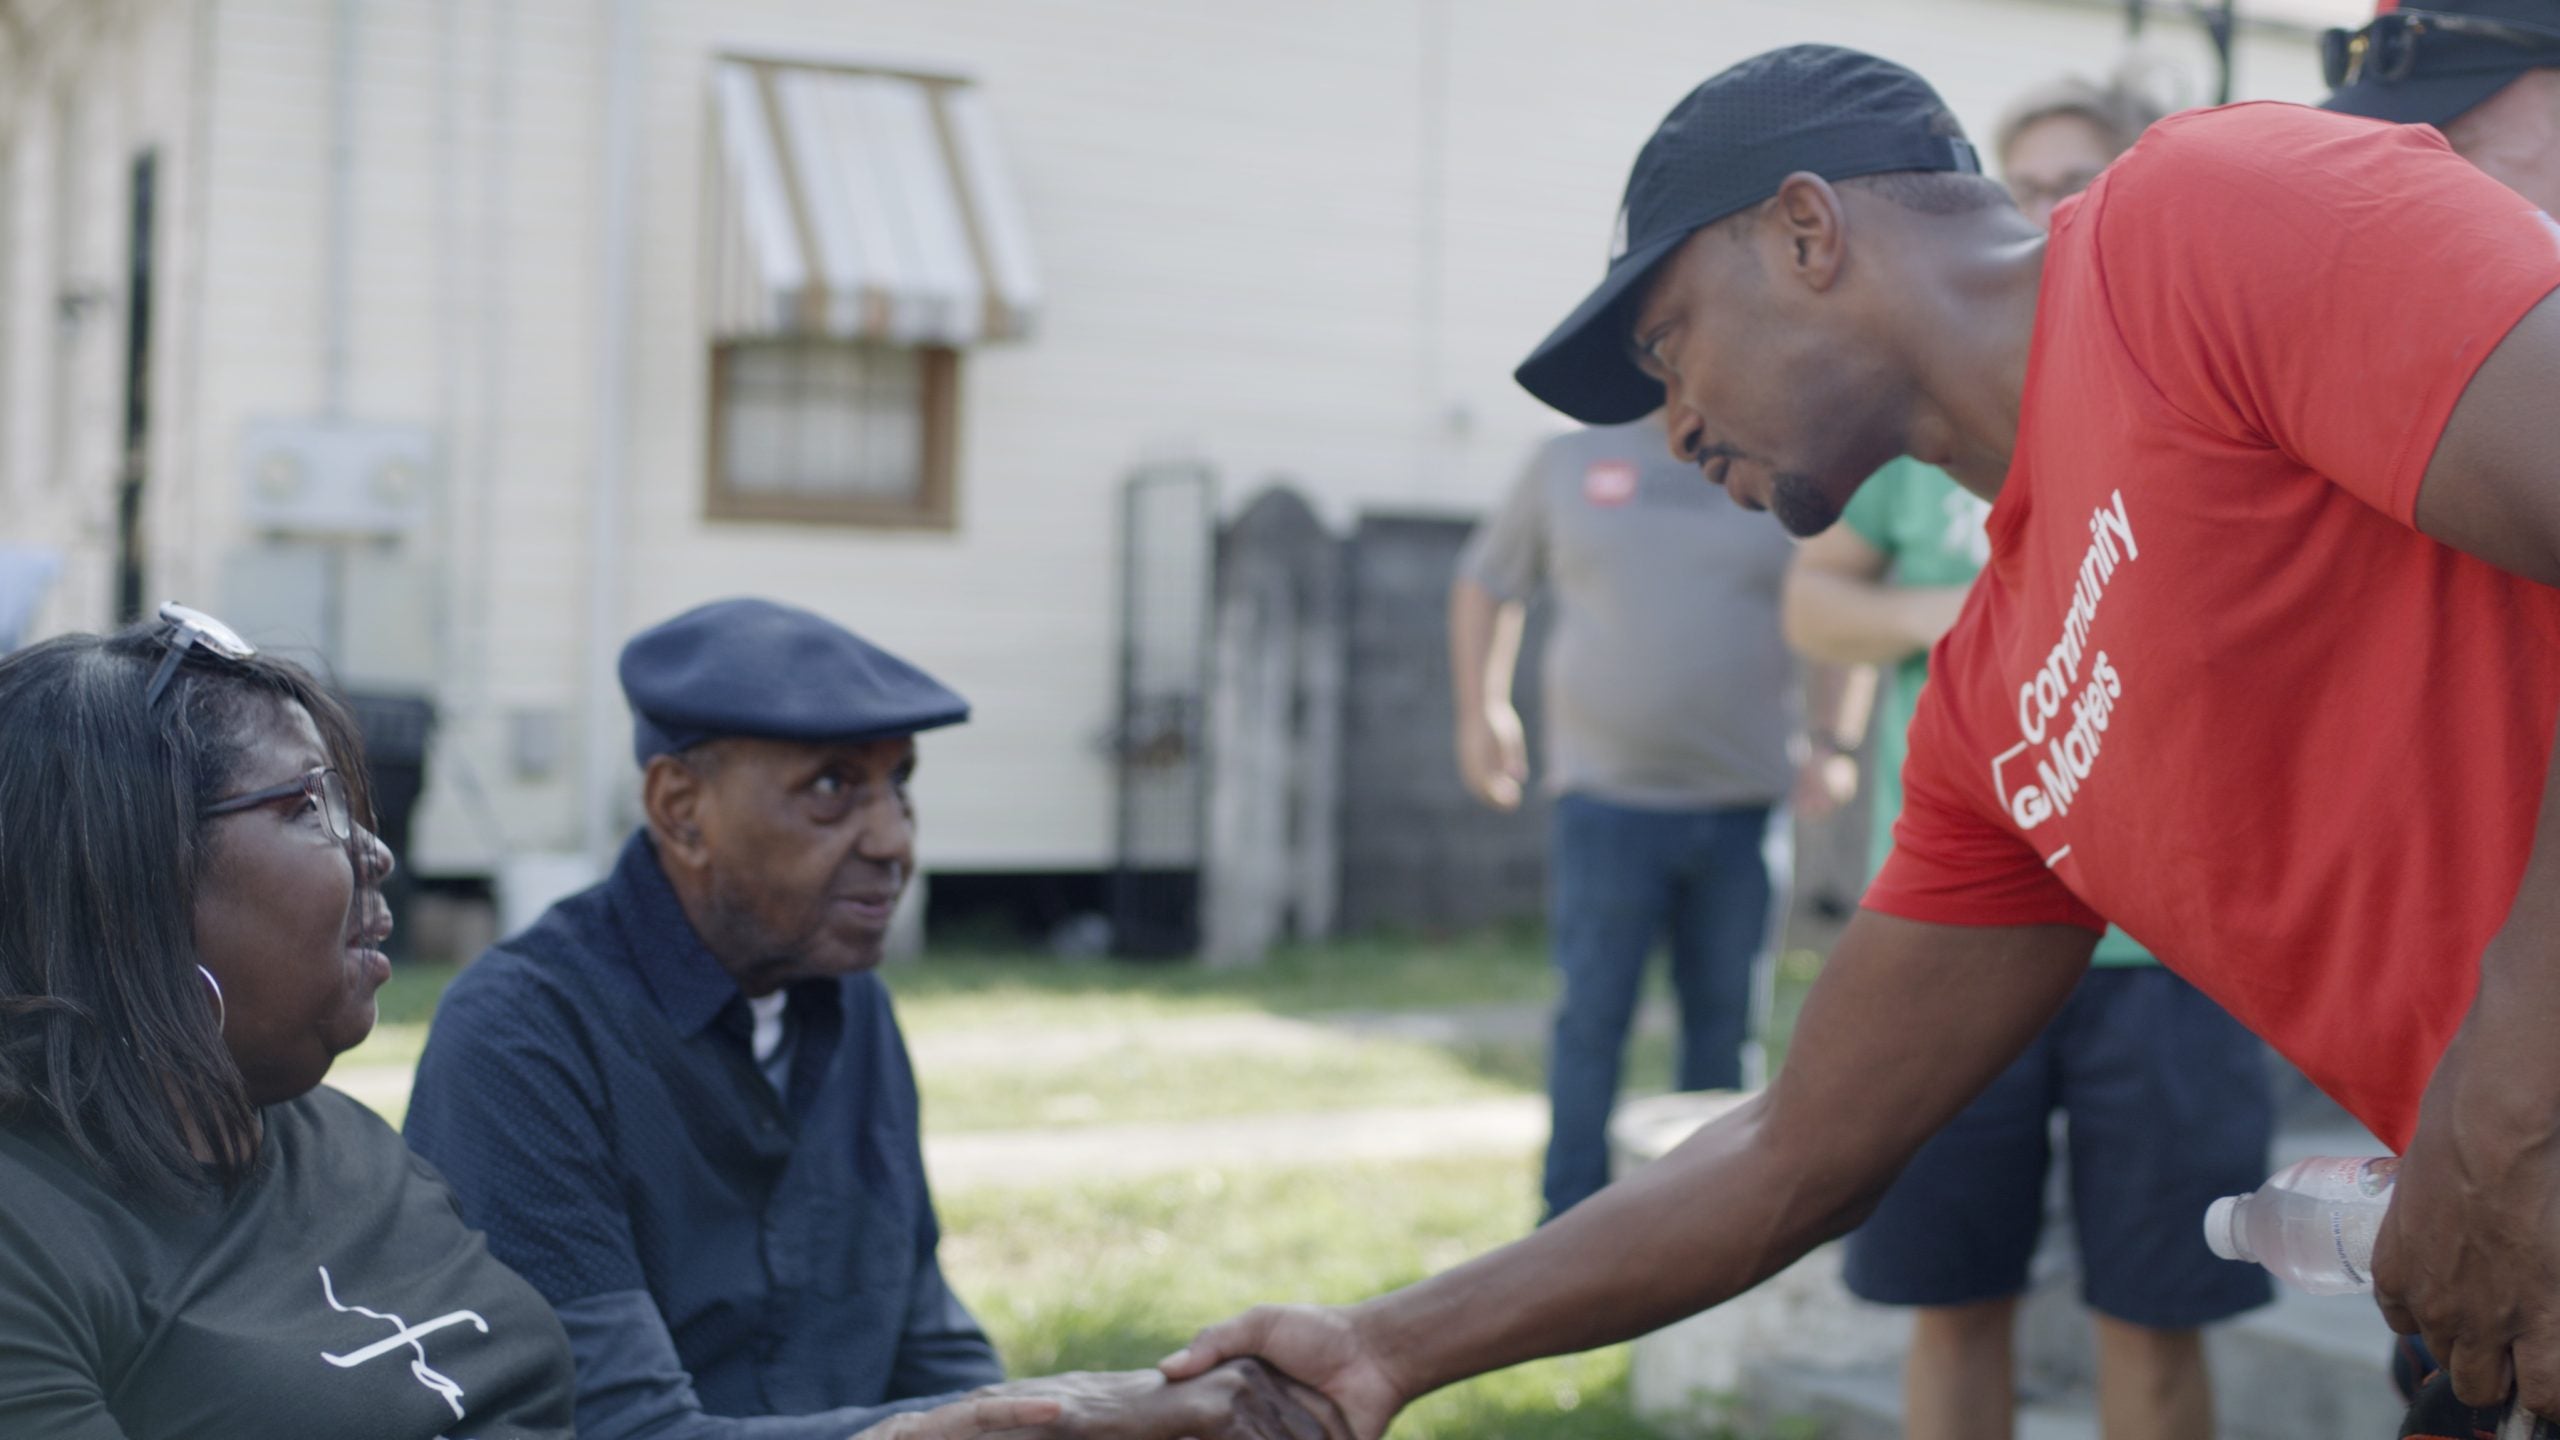 How Anthony Mackie Is Assisting New Orleans Communities Affected By Natural Disasters